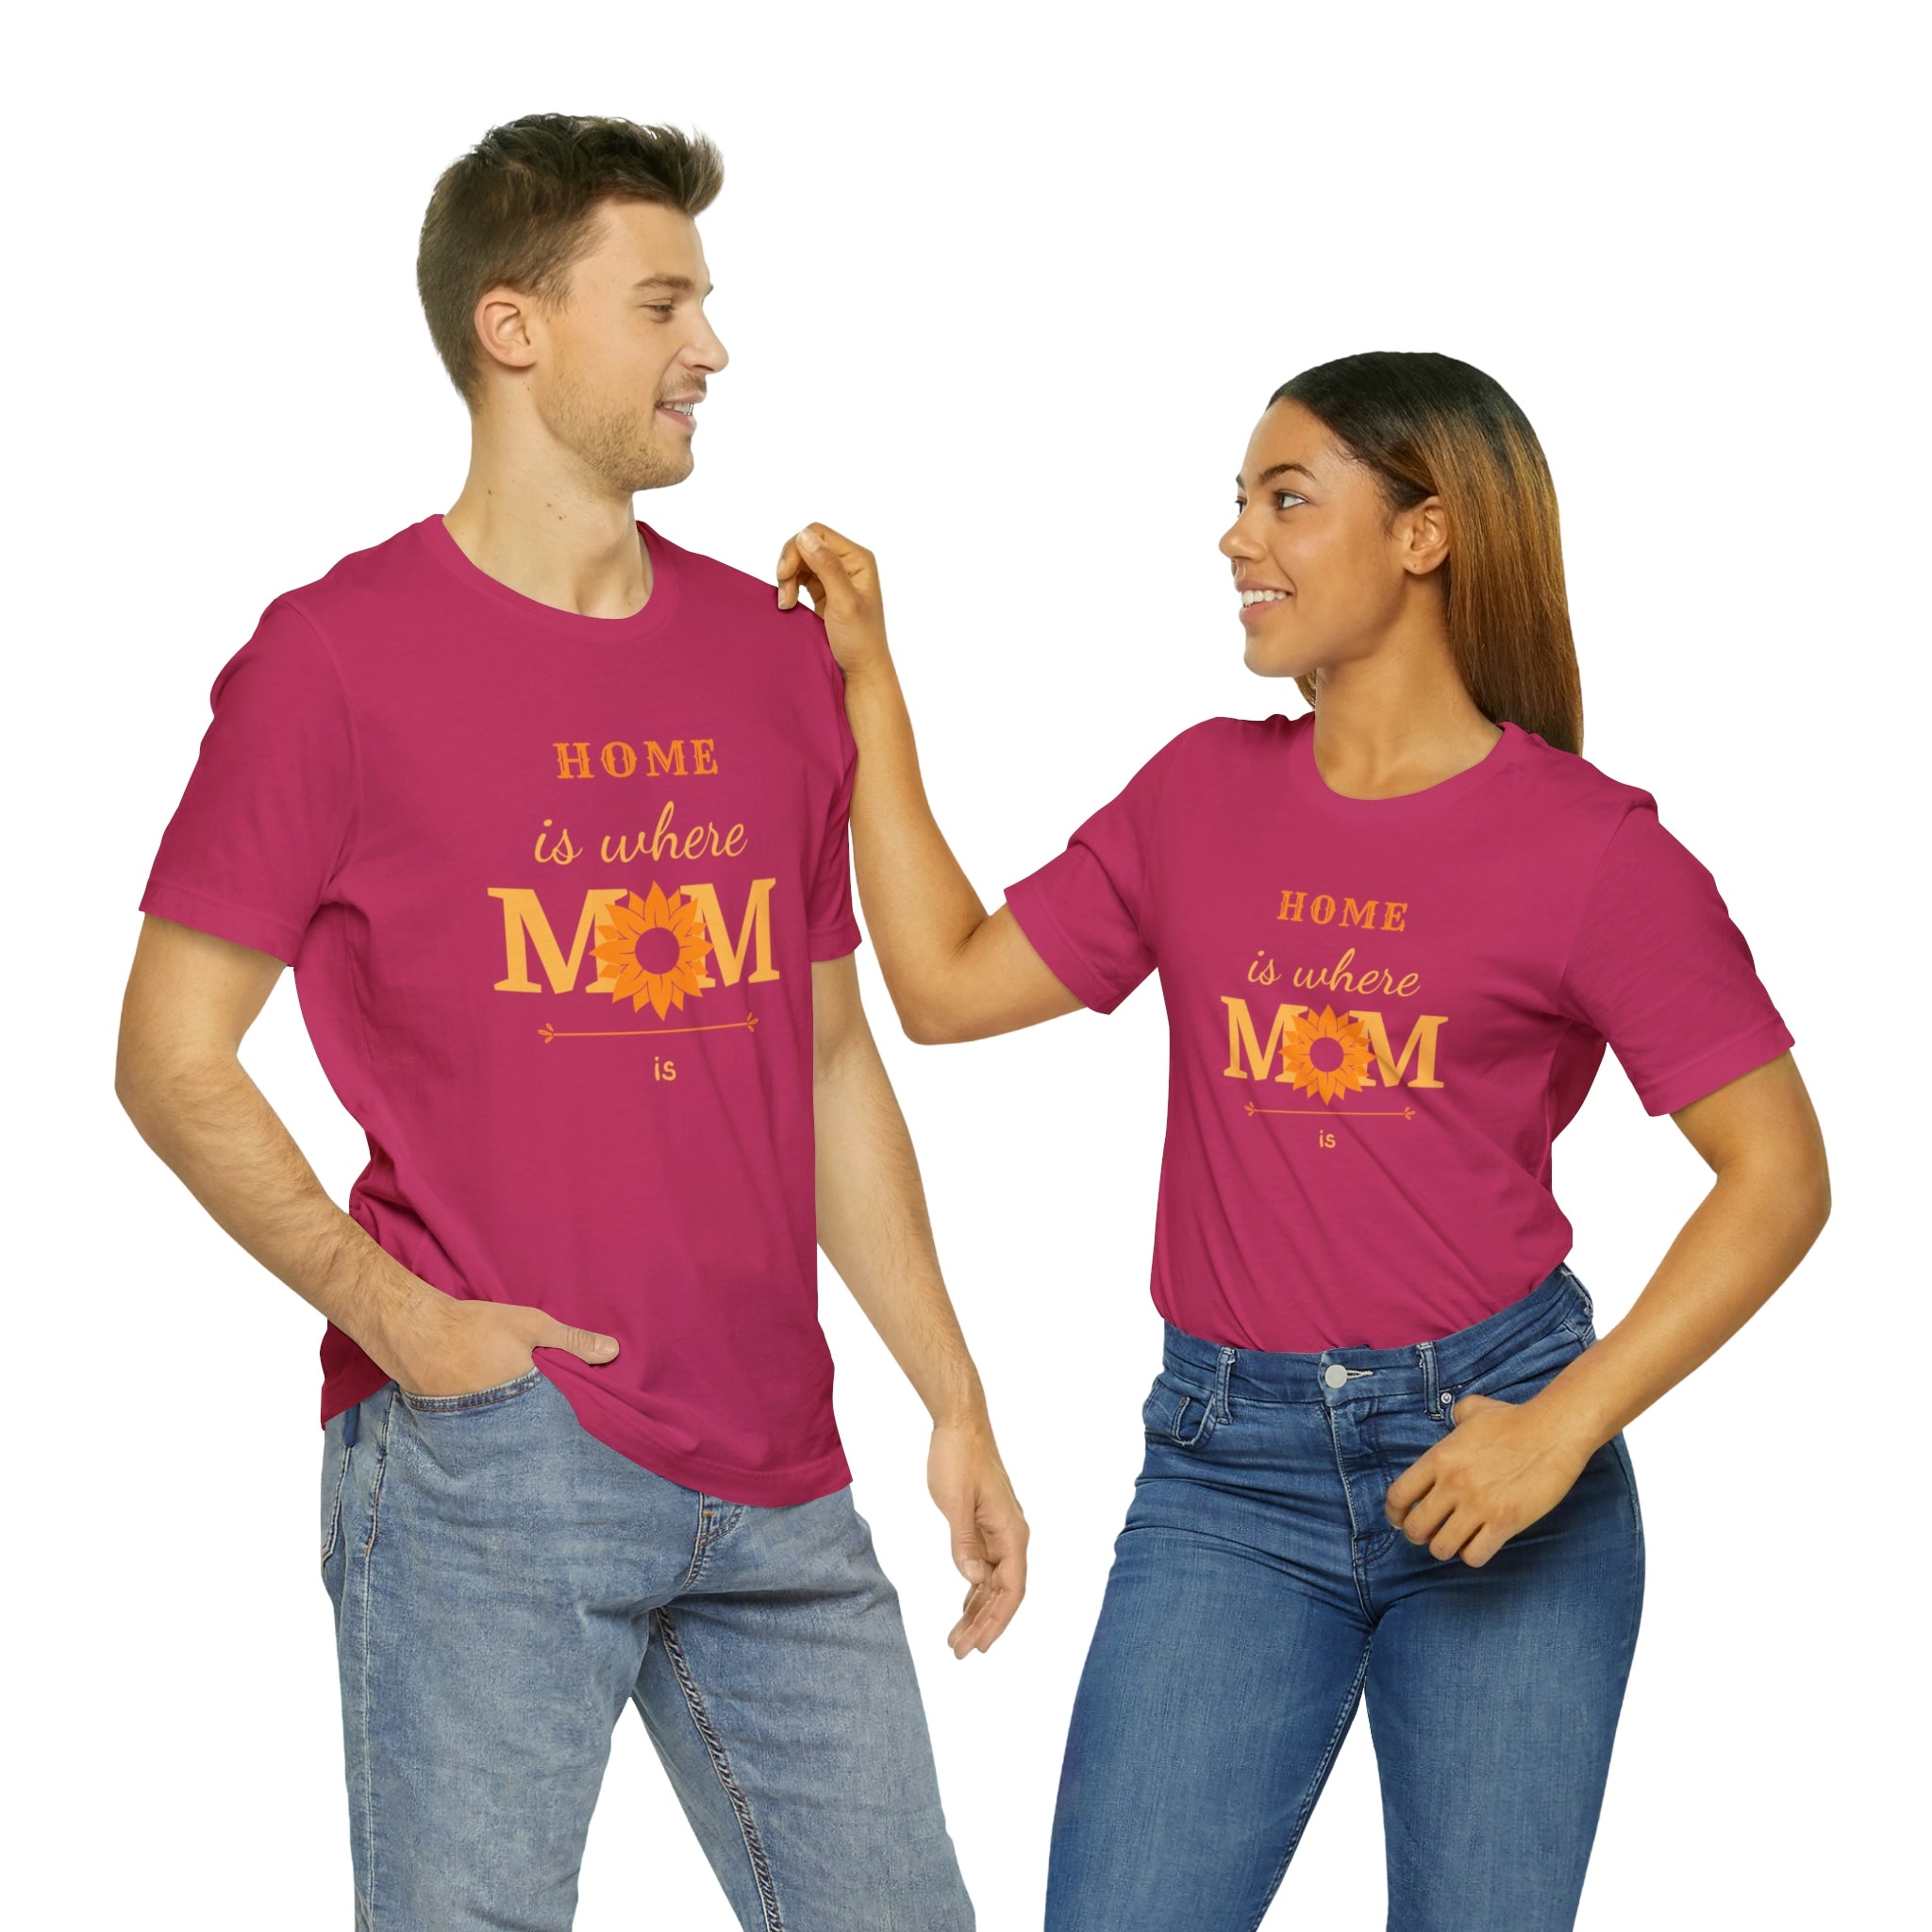 Home Is Where Mom Is Women T-shirt.